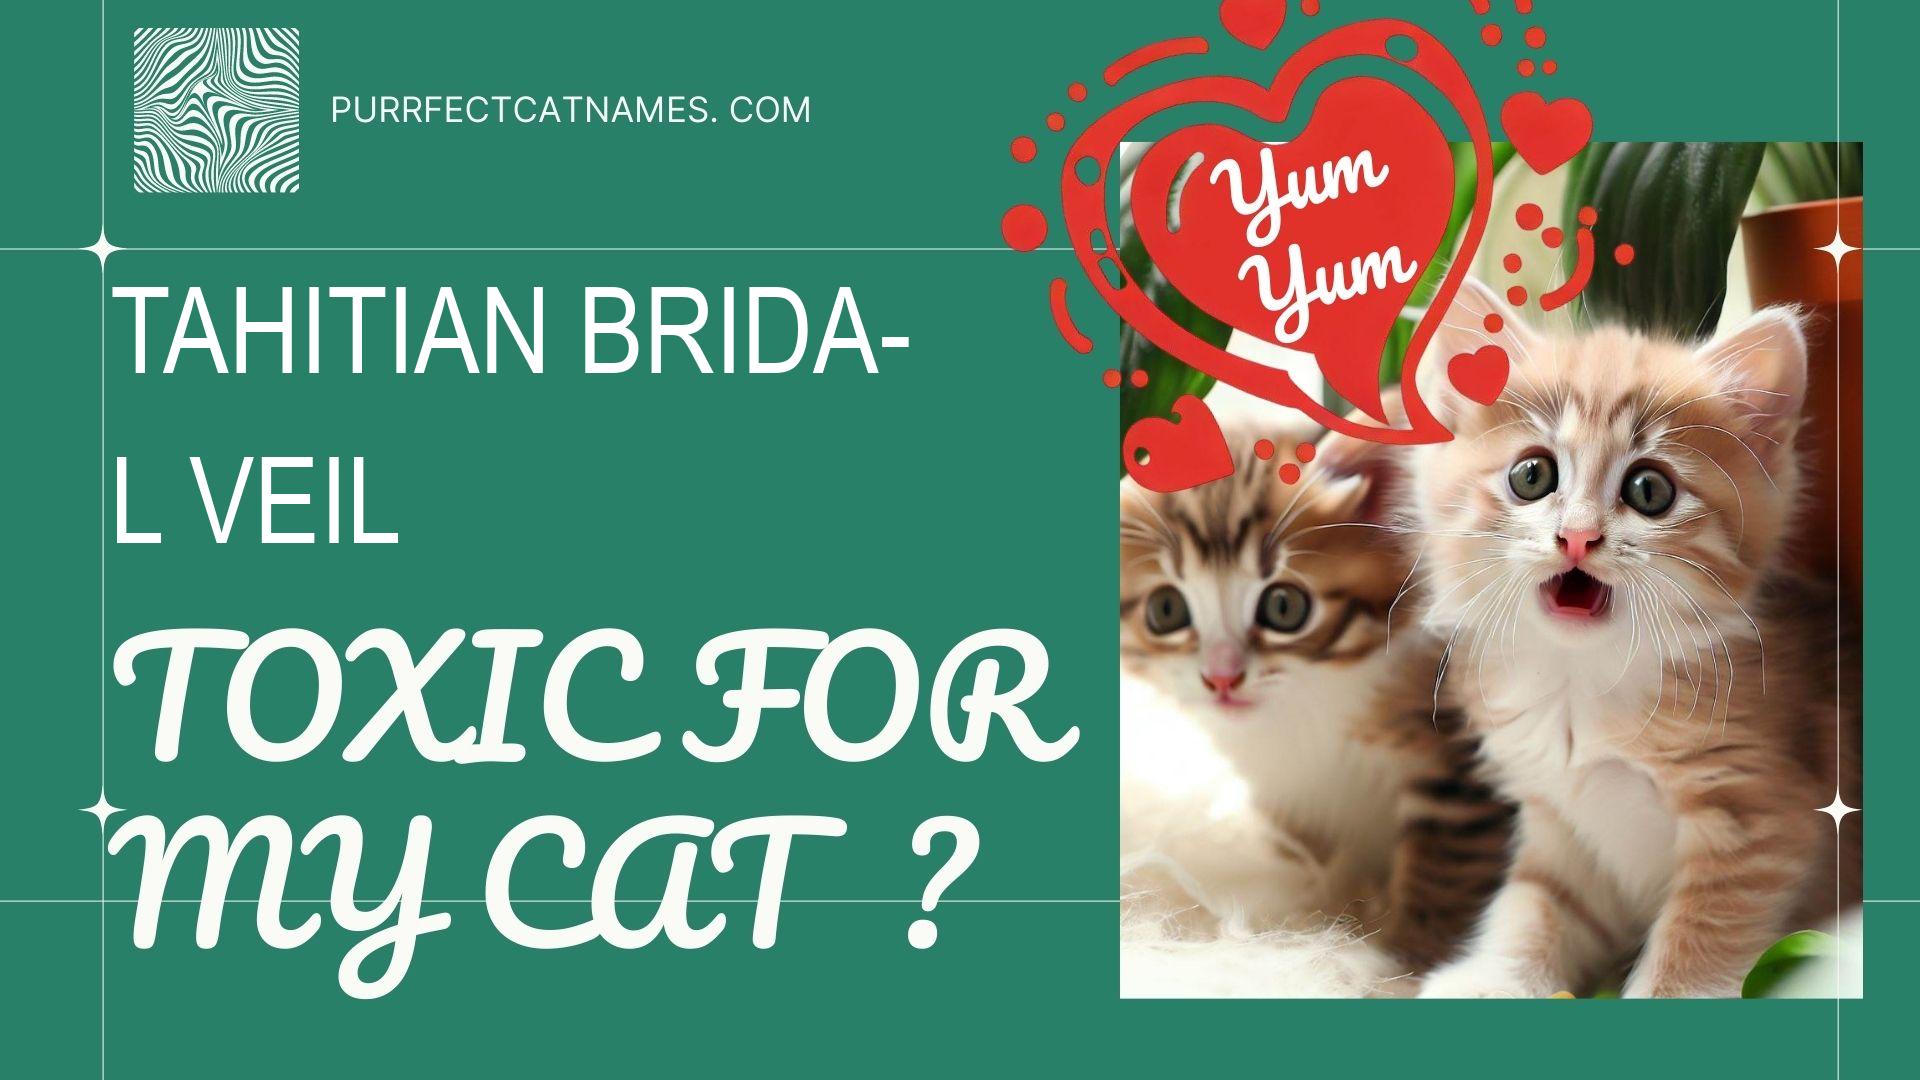 IsTahitian Bridal Veil plant toxic for your cat